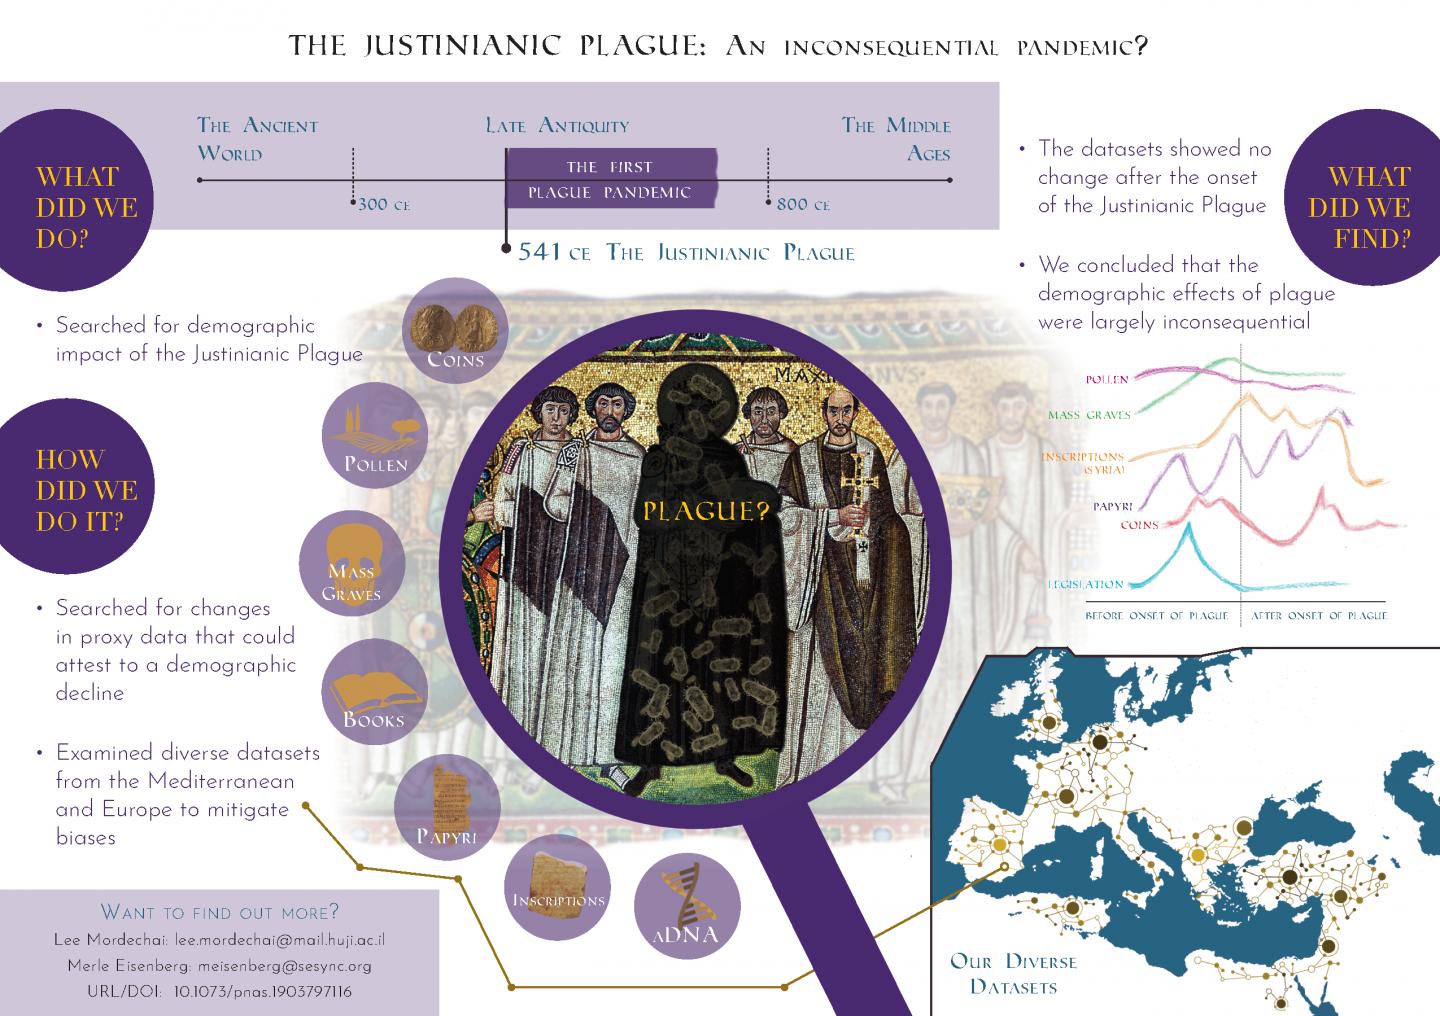 The Justinanic Plague: An Inconsequential Pandemic?